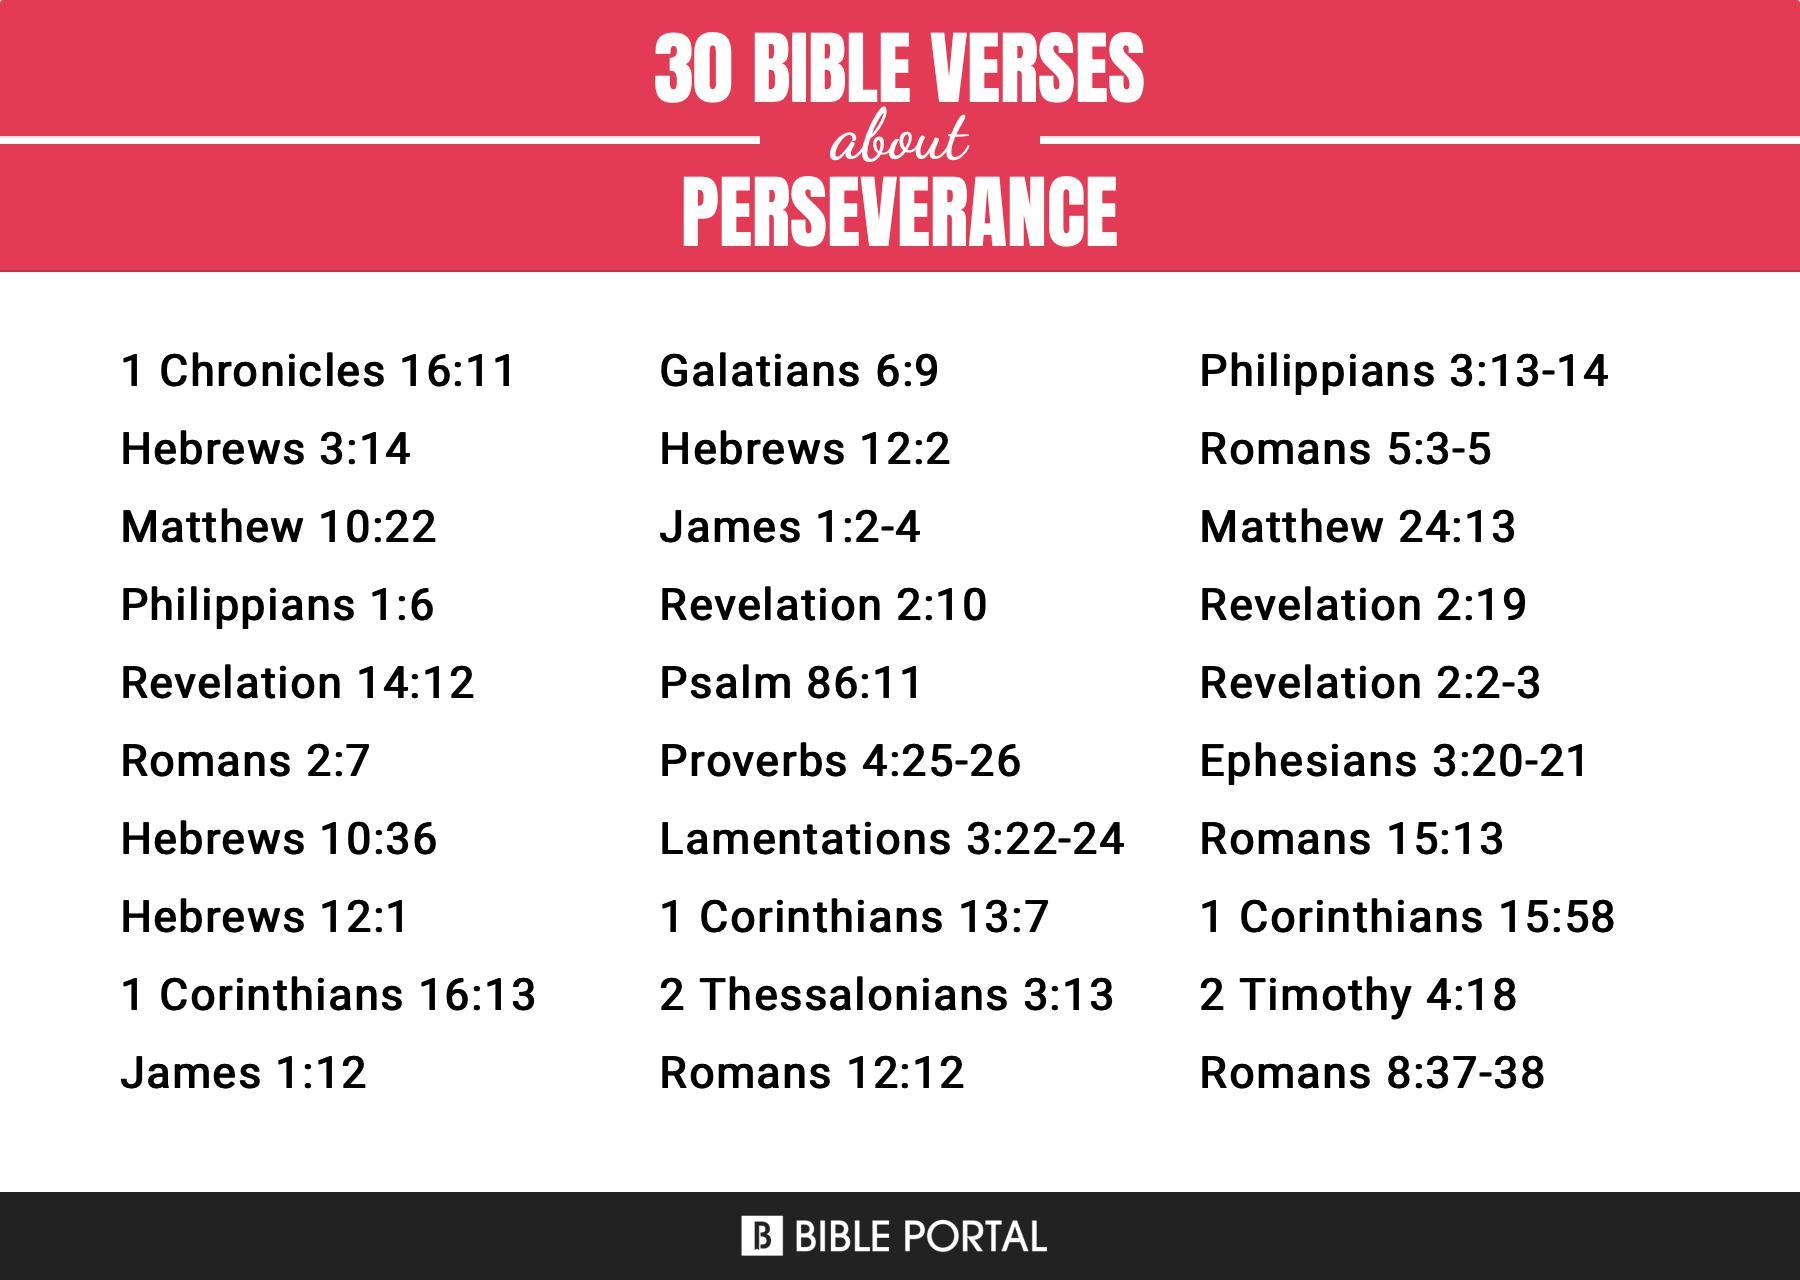 What Does the Bible Say about Perseverance?